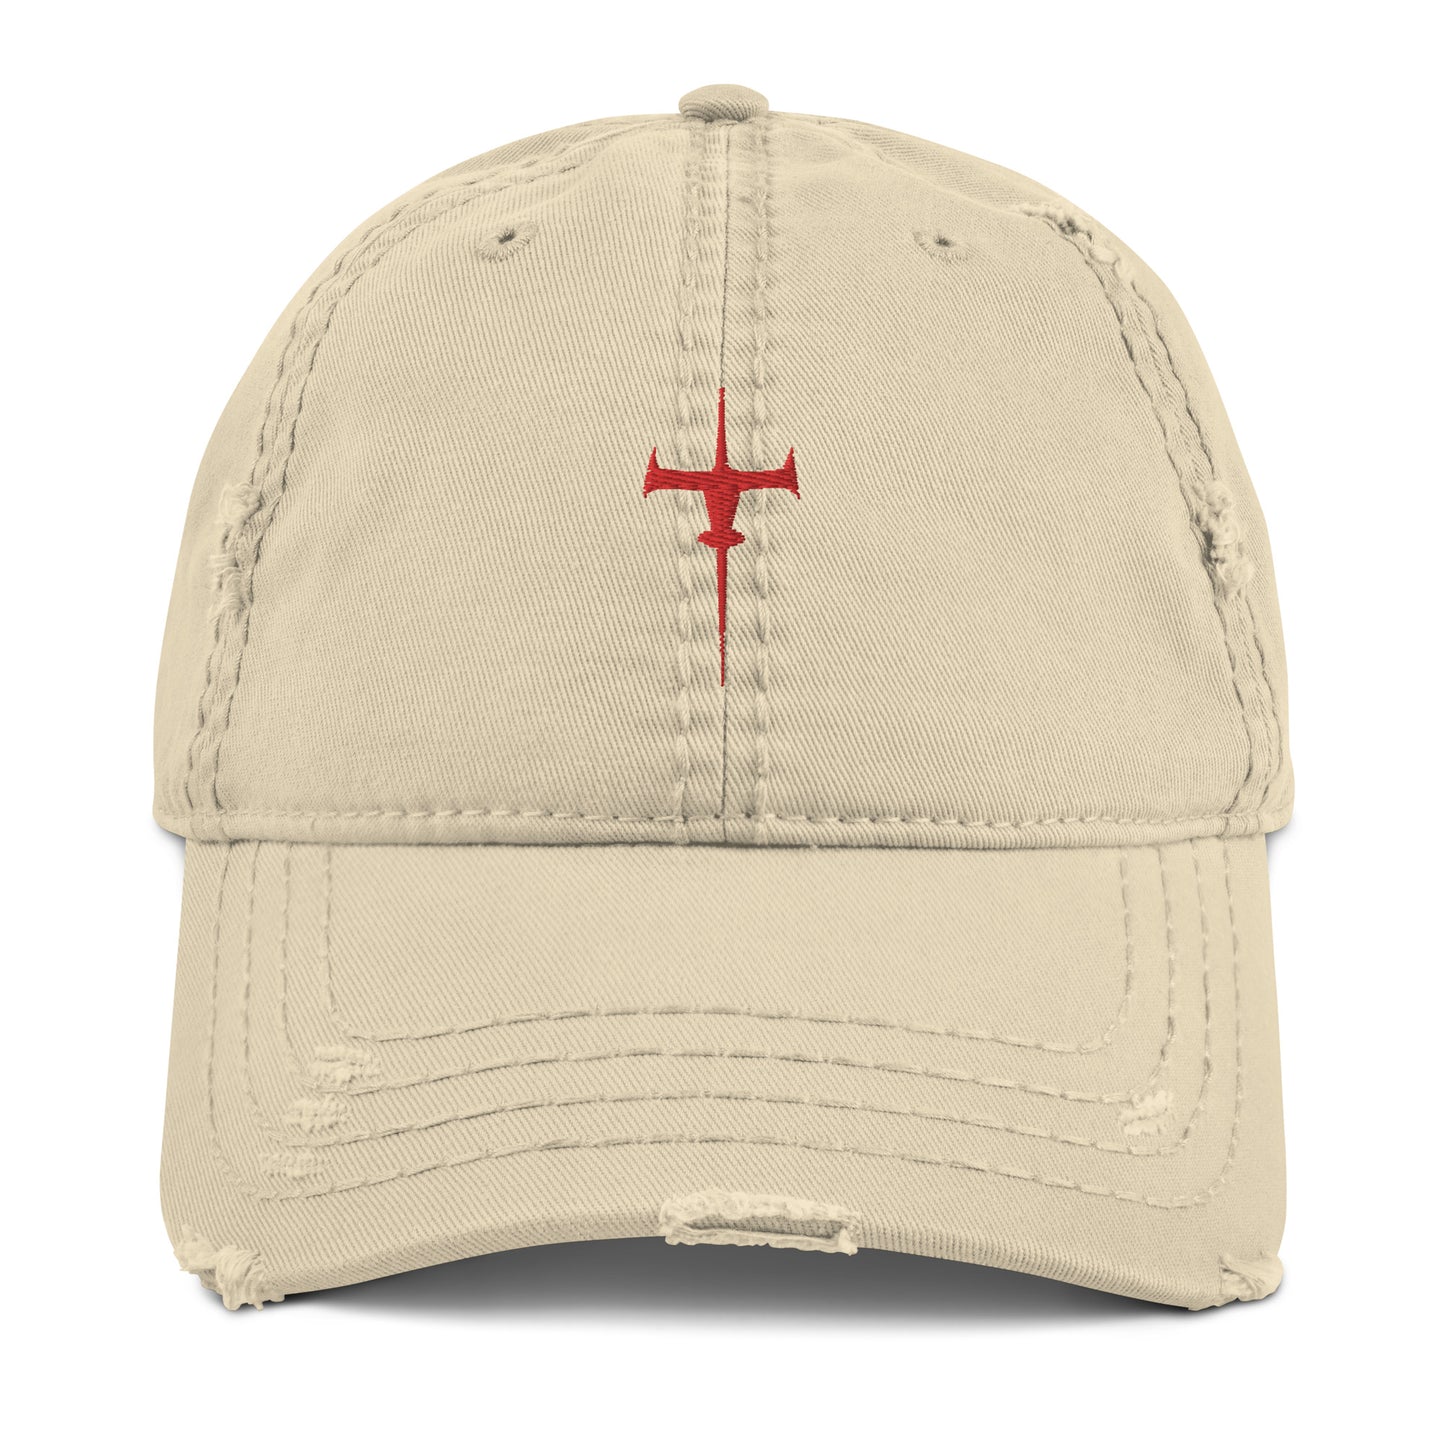 Anime Space Ship Embroidered Distressed Dad Hat